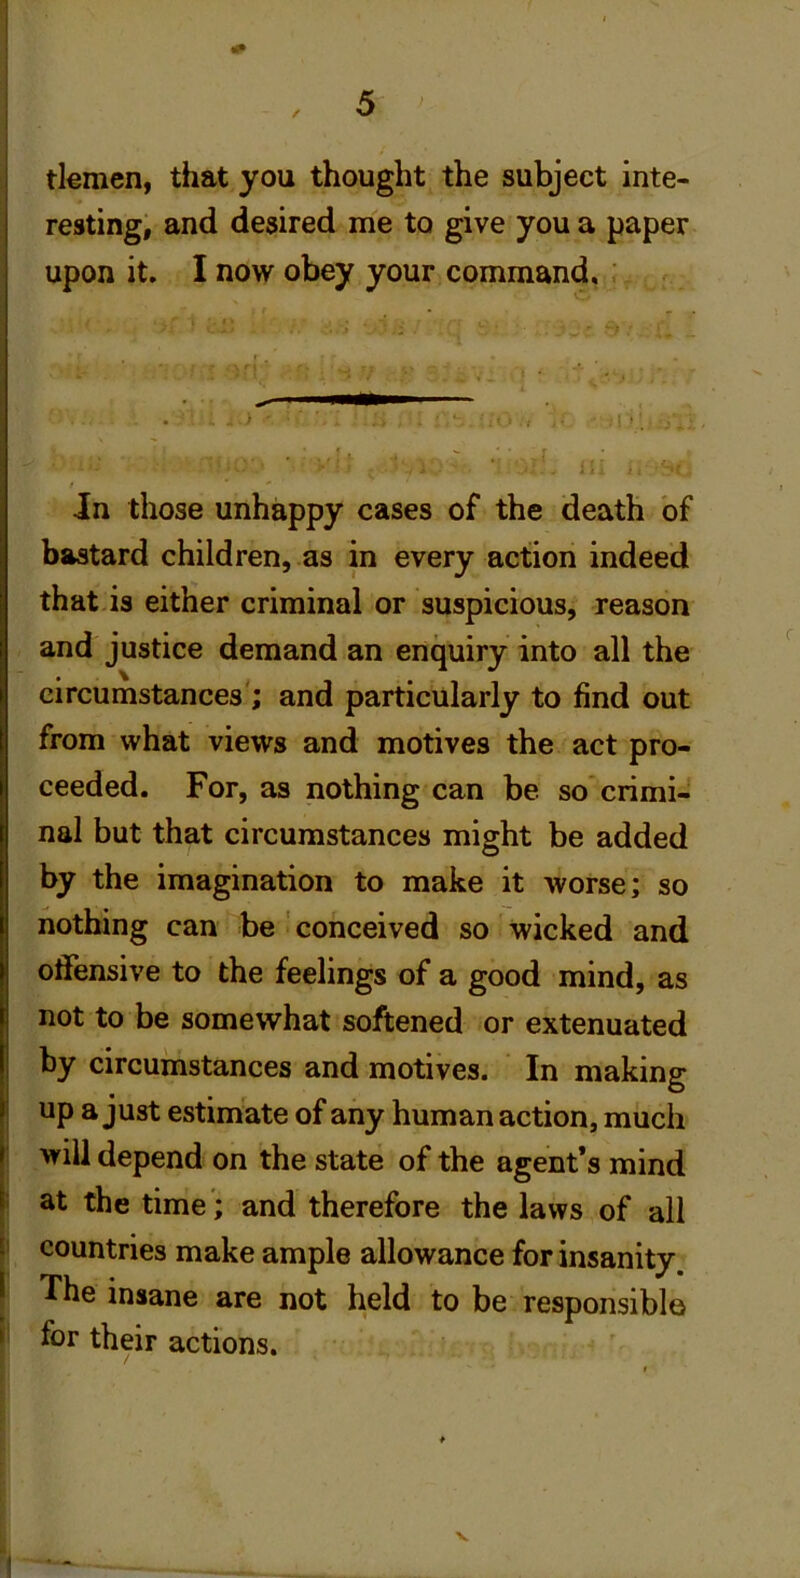 tlemcn, that you thought the subject inte- resting, and desired me to give you a paper upon it. I now obey your command, ’ Jn those unhappy cases of the death of bastard children, as in every action indeed that is either criminal or suspicious, reason and justice demand an enquiry into all the circumstances'; and particularly to find out from what views and motives the act pro- ceeded. For, as nothing can be so crimi- nal but that circumstances might be added I by the imagination to make it worse; so nothing can be ' conceived so wicked and offensive to the feelings of a good mind, as not to be somewhat softened or extenuated by circumstances and motives. In making up a just estimate of any human action, much will depend on the state of the agent’s mind I at the time'; and therefore the laws of all countries make ample allowance for insanity. \ The insane are not held to be responsible ► for their actions.